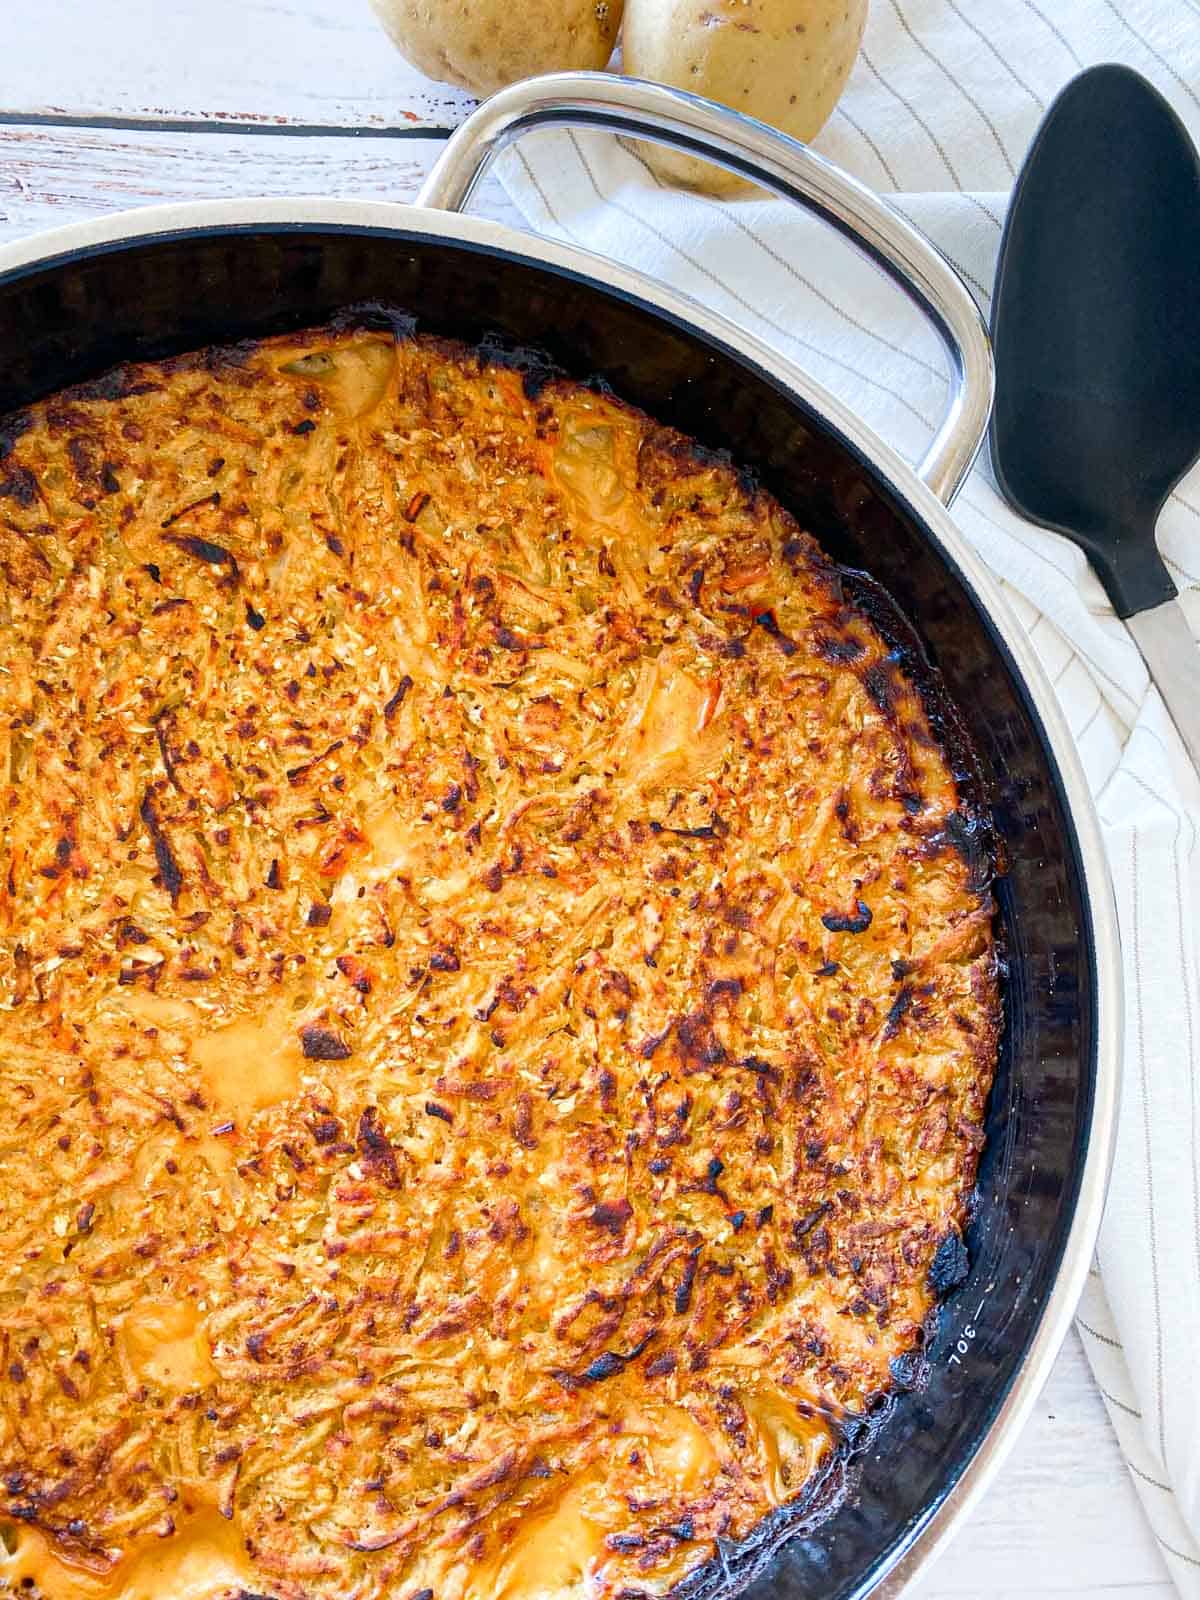 Round casserole dish filled with vegan cheesy shredded potatoes.